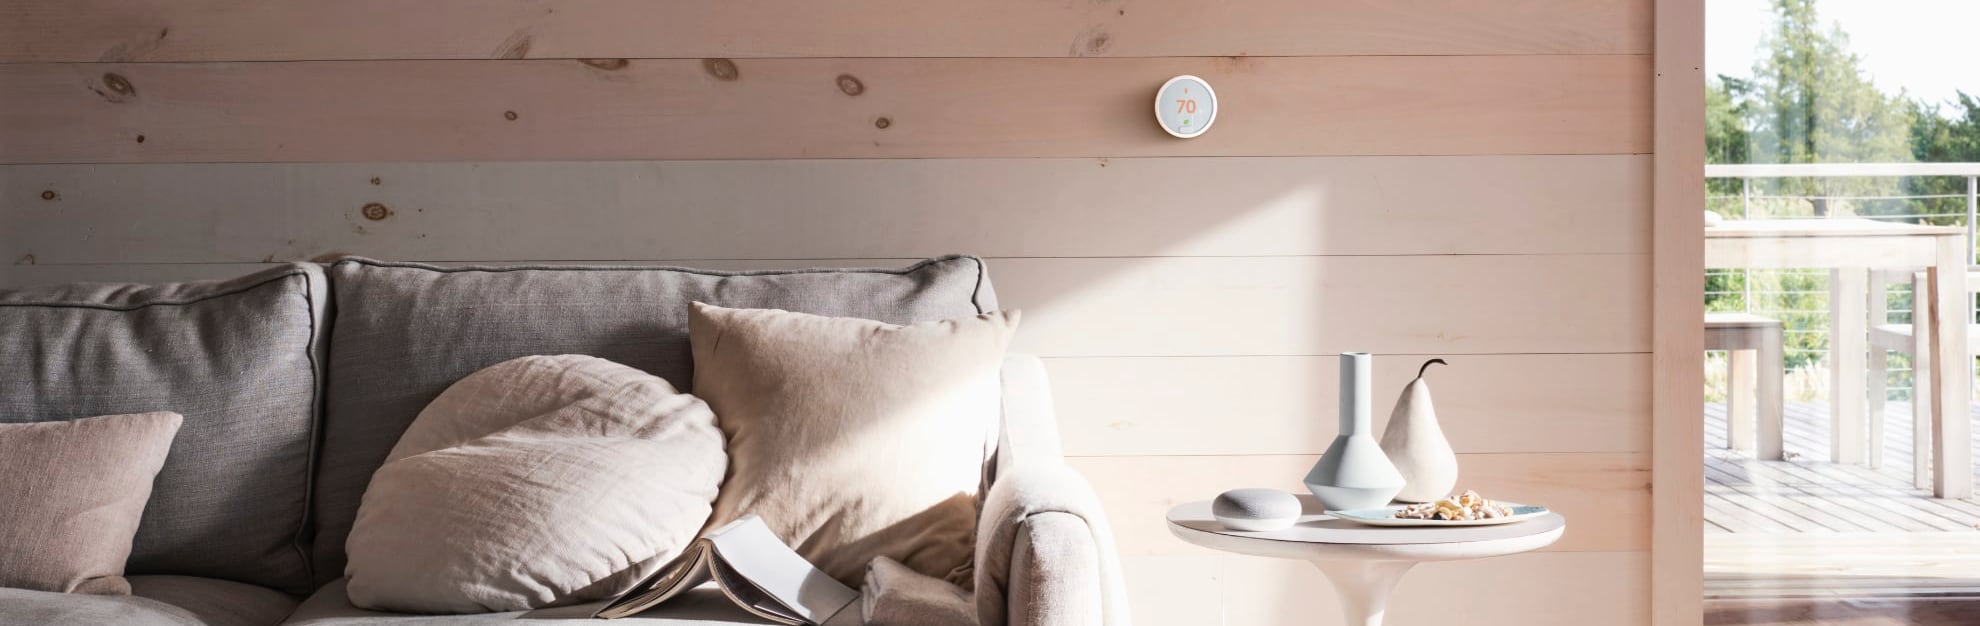 Vivint Home Automation in Columbia